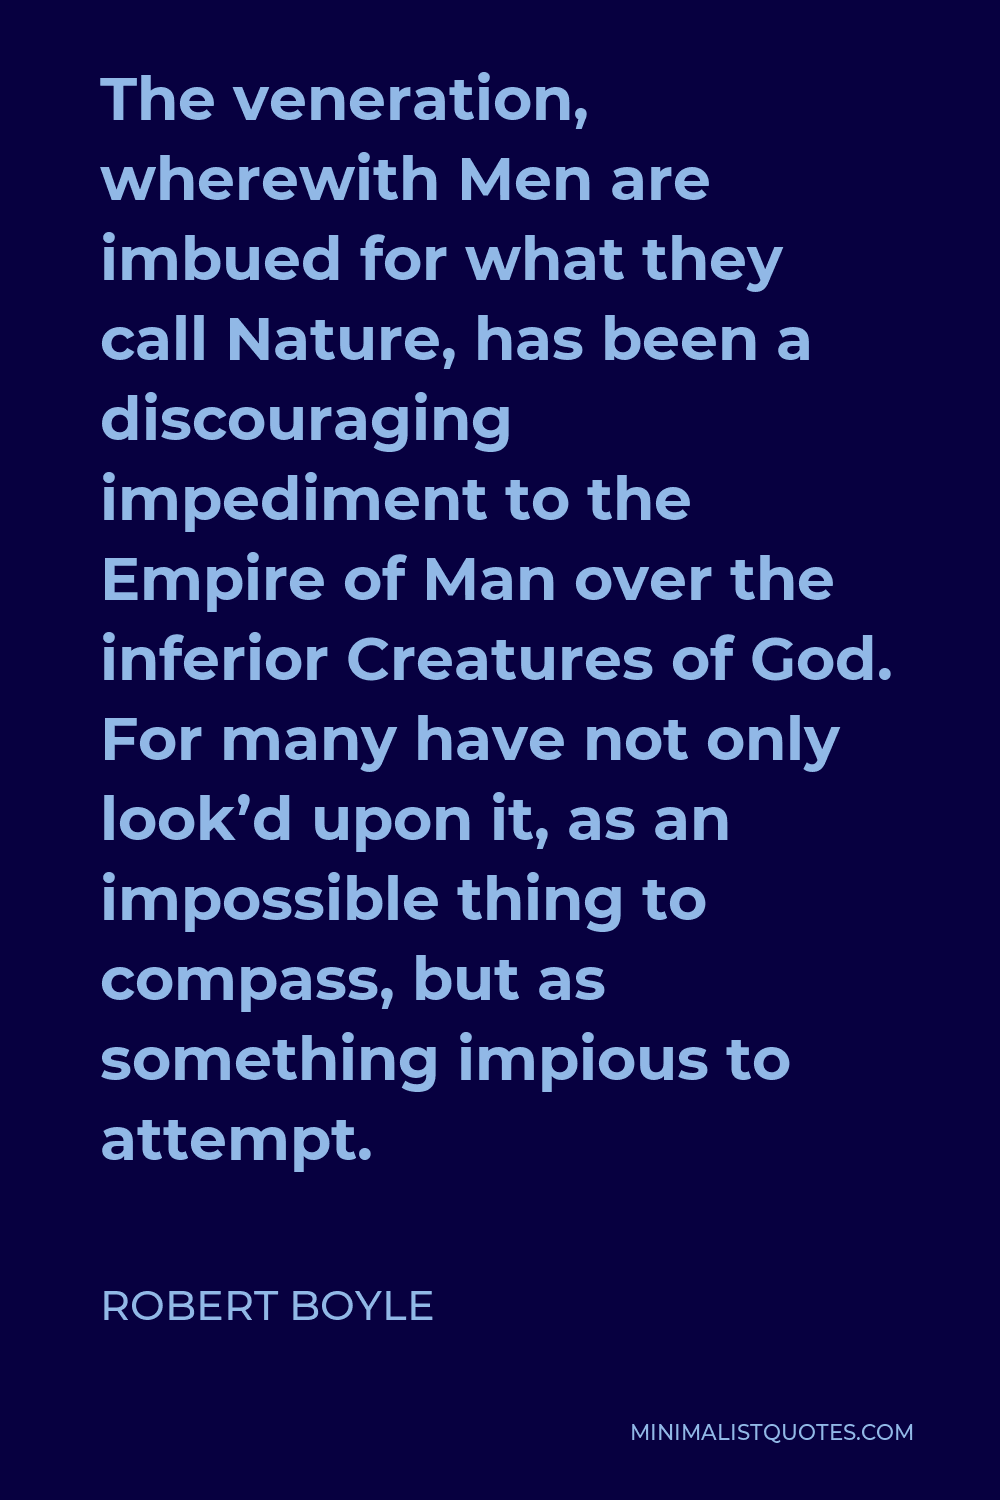 Robert Boyle Quote - The veneration, wherewith Men are imbued for what they call Nature, has been a discouraging impediment to the Empire of Man over the inferior Creatures of God. For many have not only look’d upon it, as an impossible thing to compass, but as something impious to attempt.